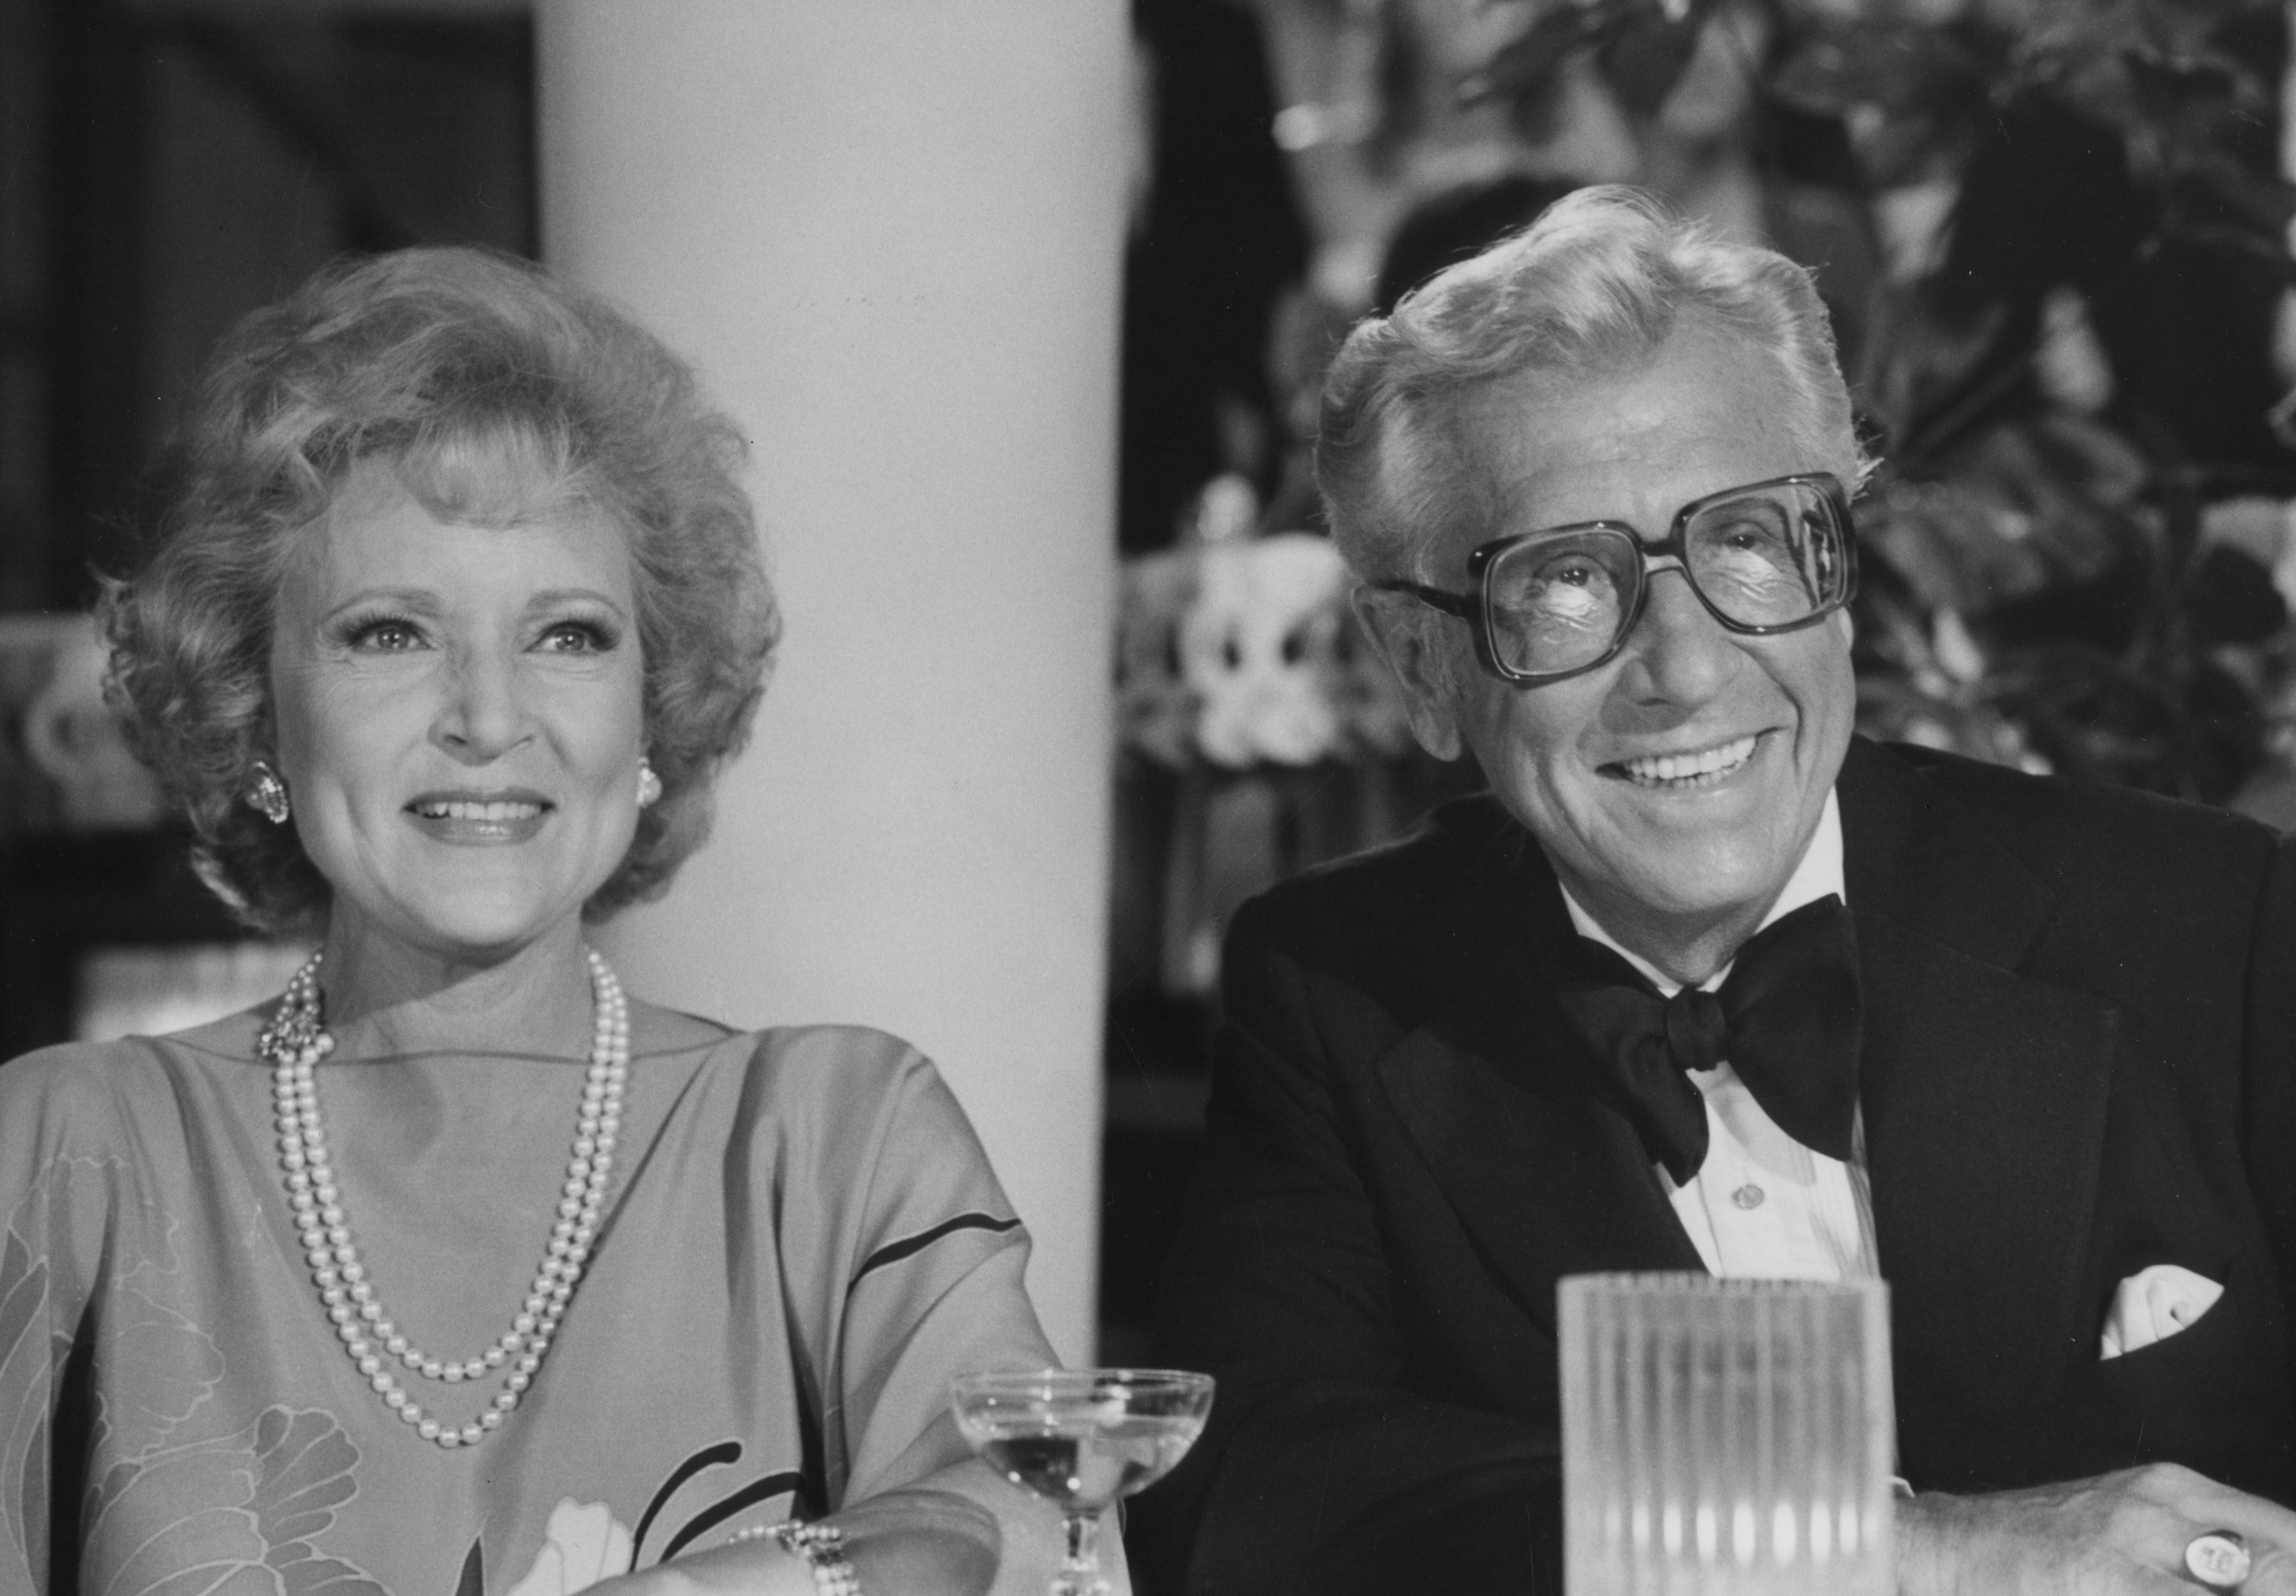 Betty White and Allen Ludden on "LOVE BOAT" - "Secretary to the Stars/Julie's Decision/The Horse Lover/ Gopher and Isaac Buy a Horse" which aired on November 22, 1980